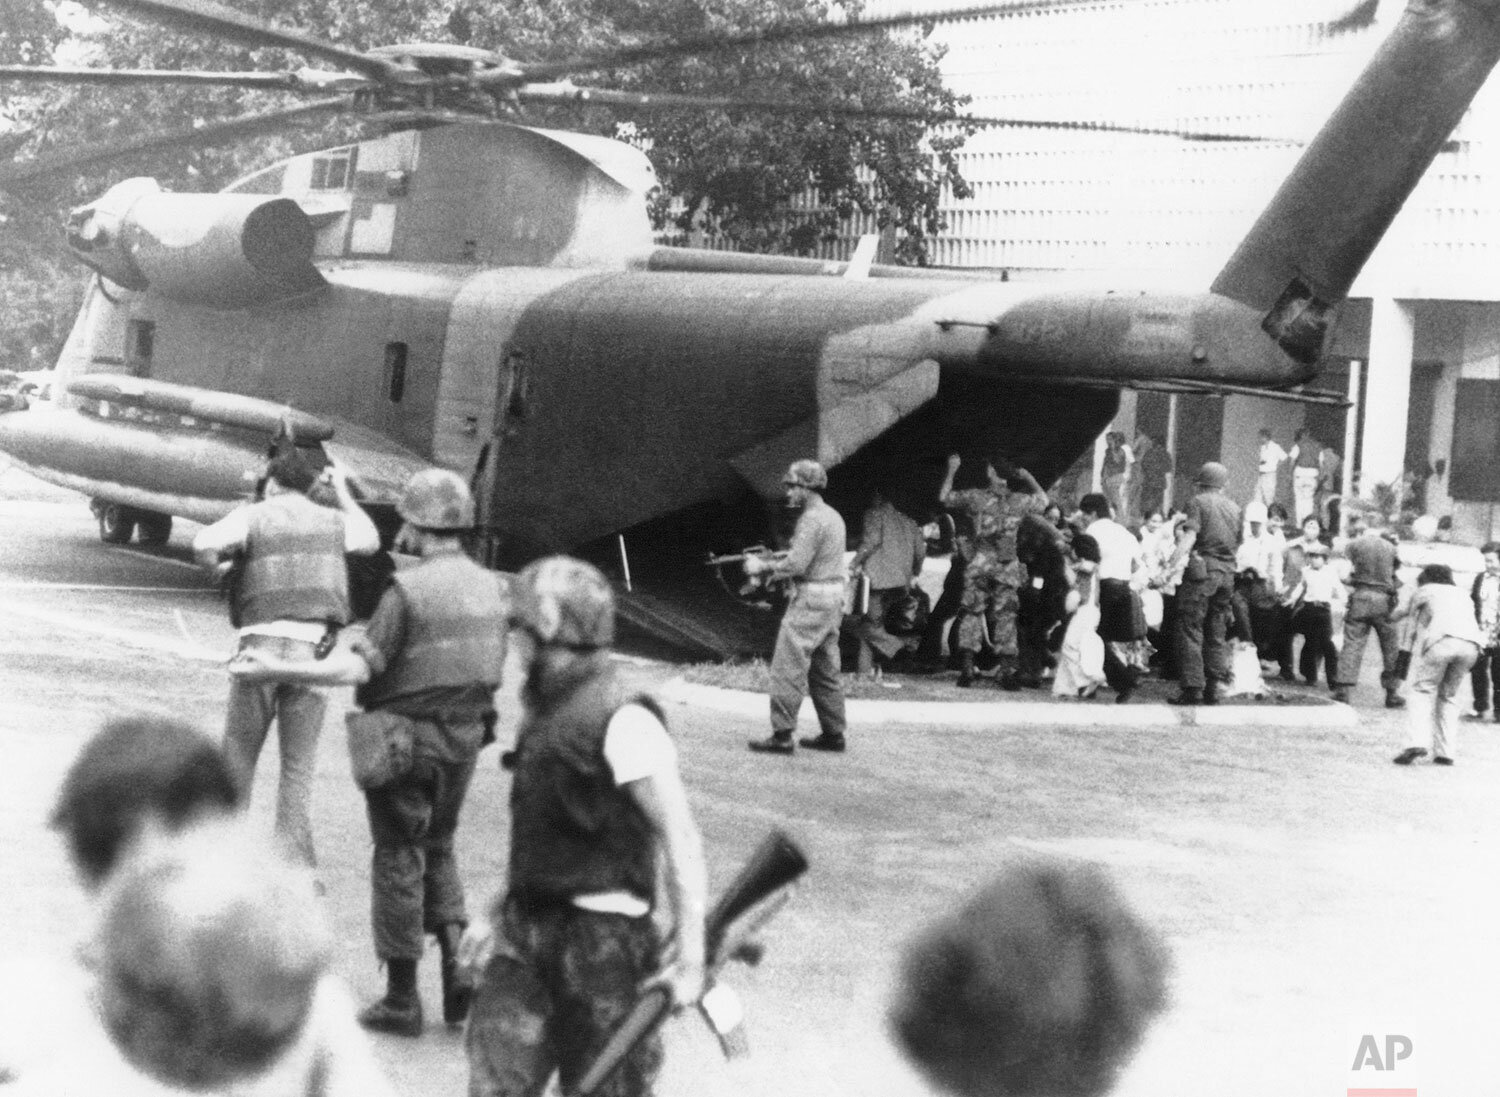  U.S. Marines disembark from a CH-53 "Jolly Green Giant" to restore order and restrain crowds at the gates of the U.S. Embassy in Saigon during the final evacuation on April 29, 1975. (AP Photo/Frances Starner) 